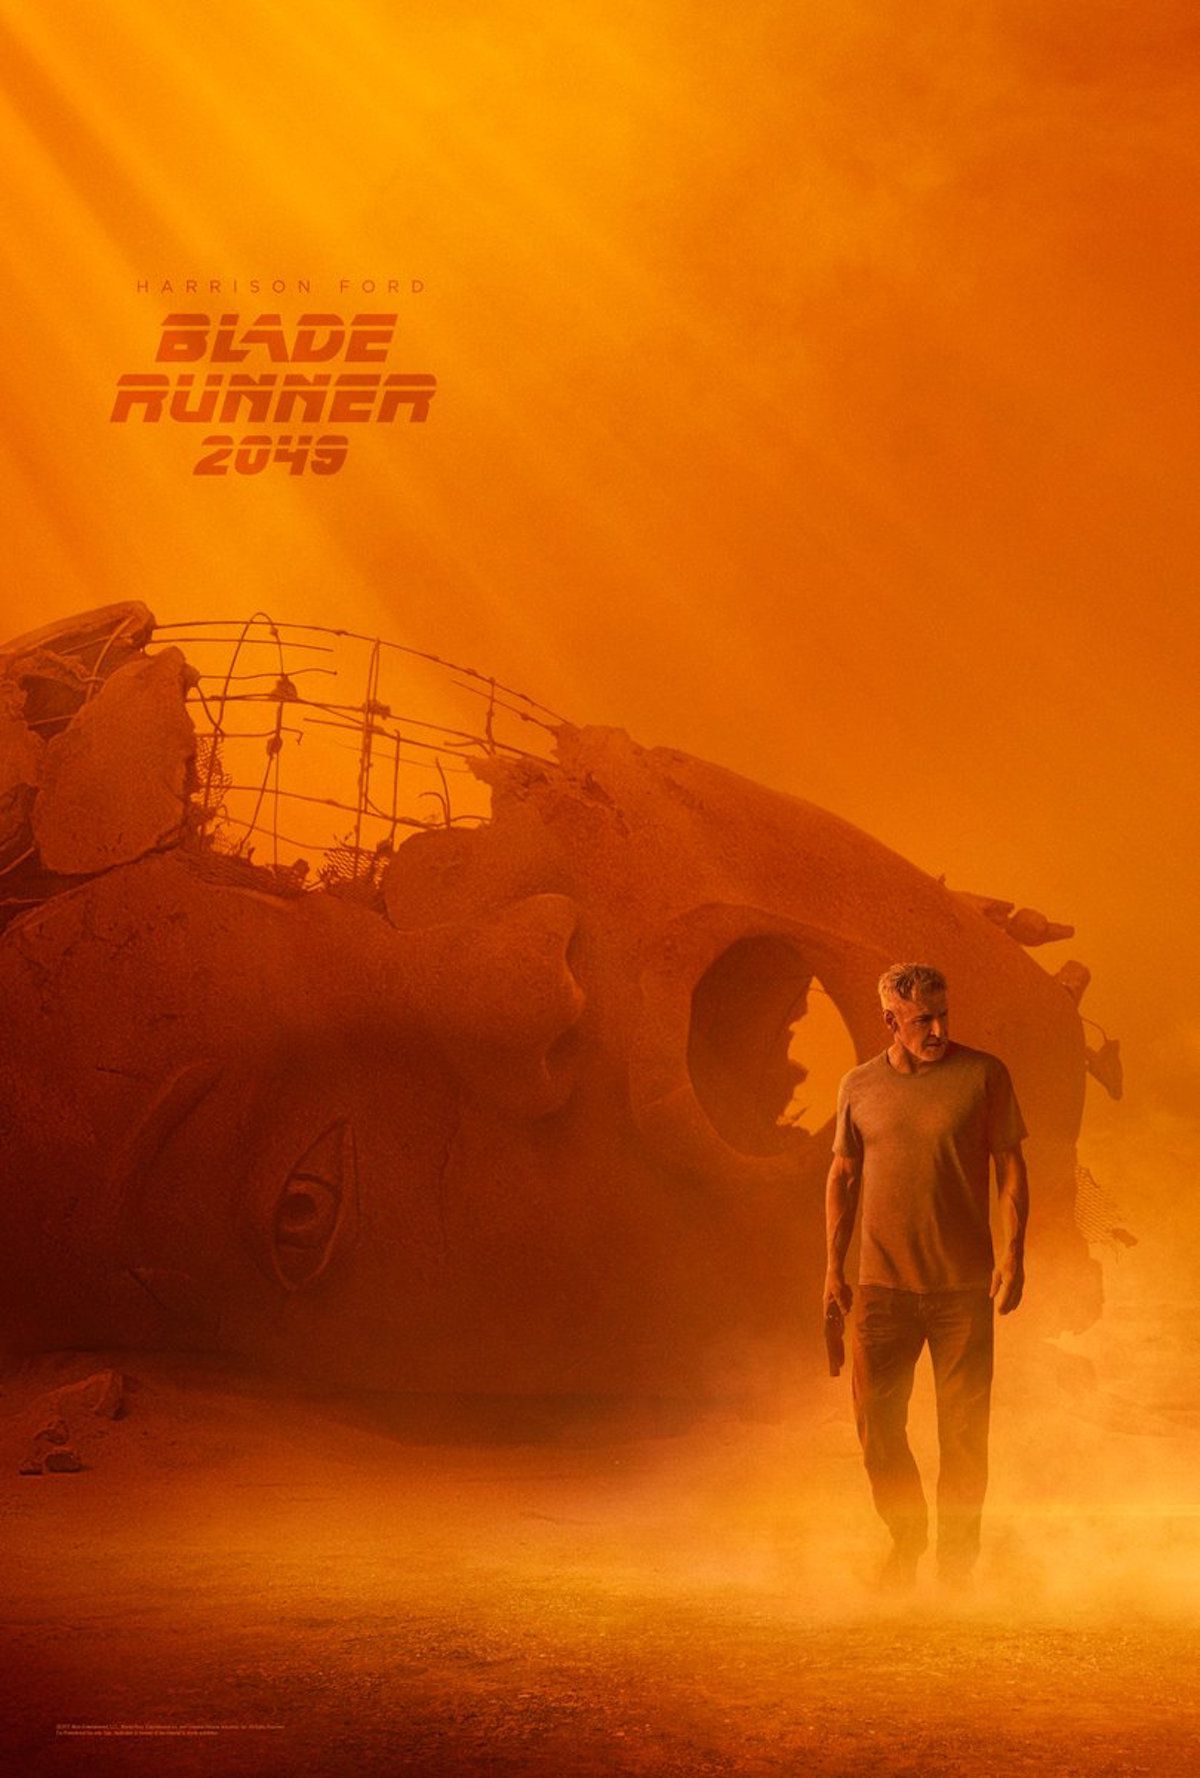 blade runner 2049 poster ford Here are two new swanky posters for Blade Runner 2049